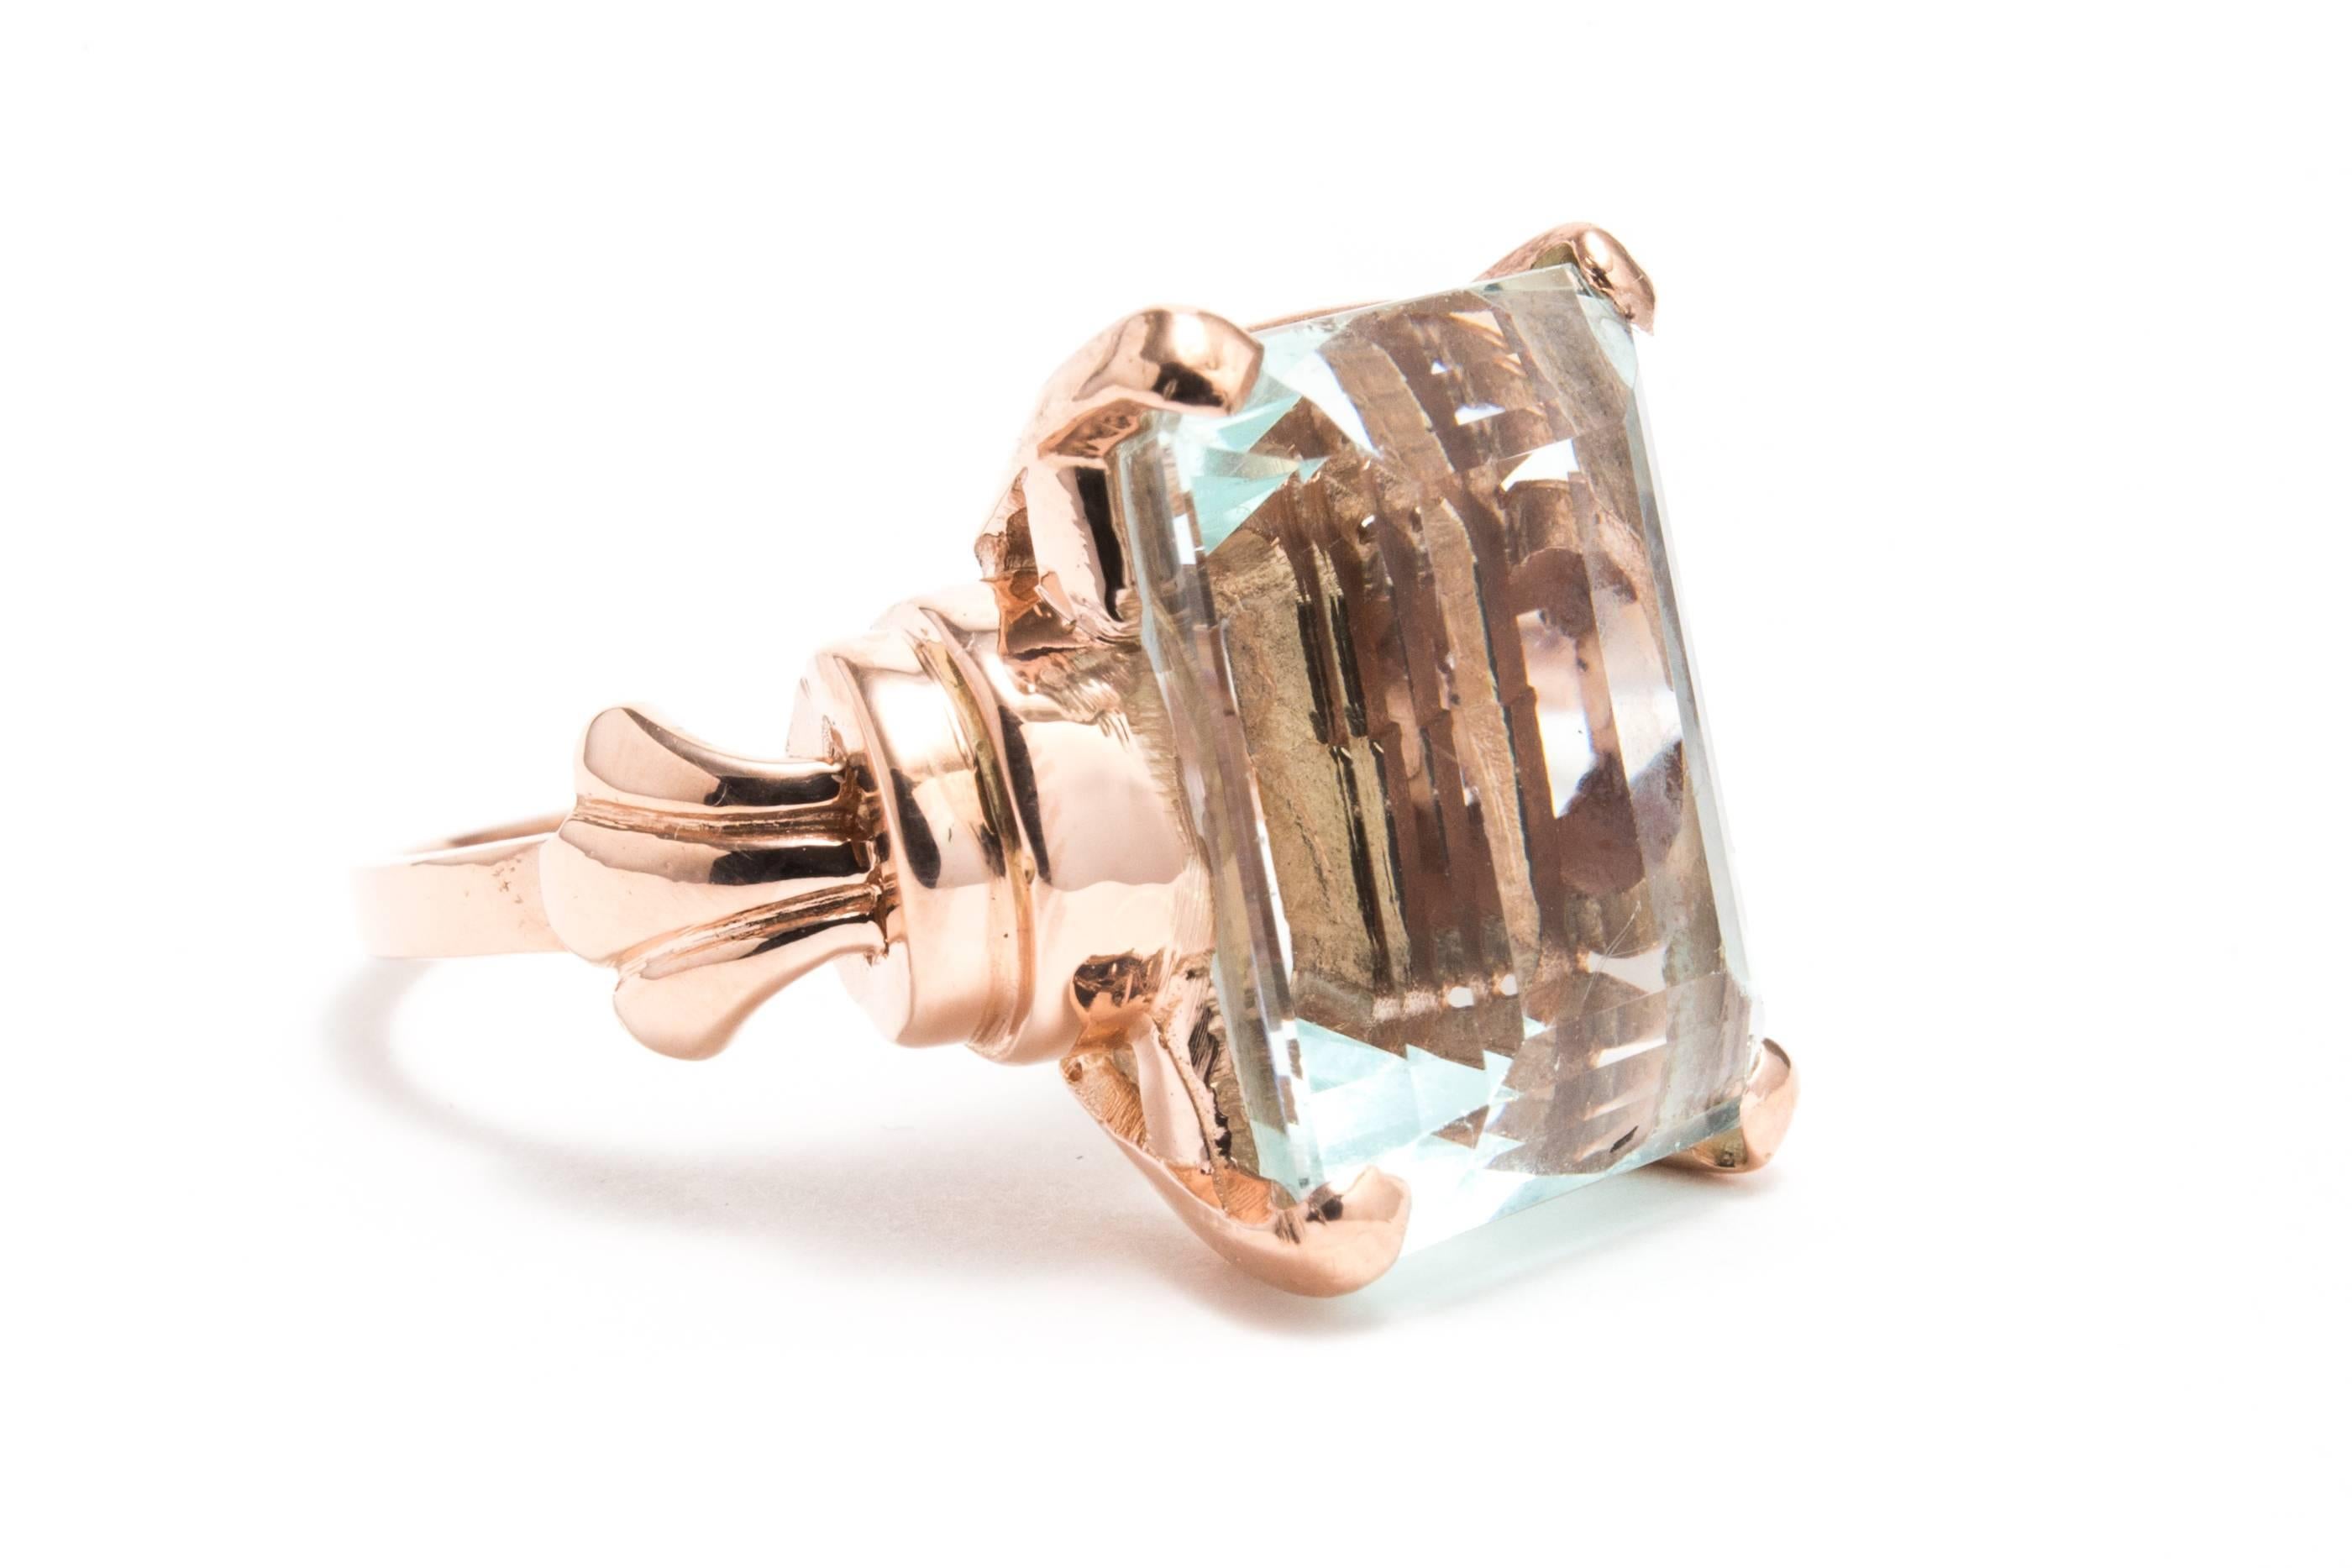 A beautiful original retro period rose gold and aquamarine solitaire ring.  Centered by a large, 14.34 carat emerald cut aquamarine, this ring features a classic handmade rose gold mounting in a traditional retro style.

Of beautiful VVS clarity and